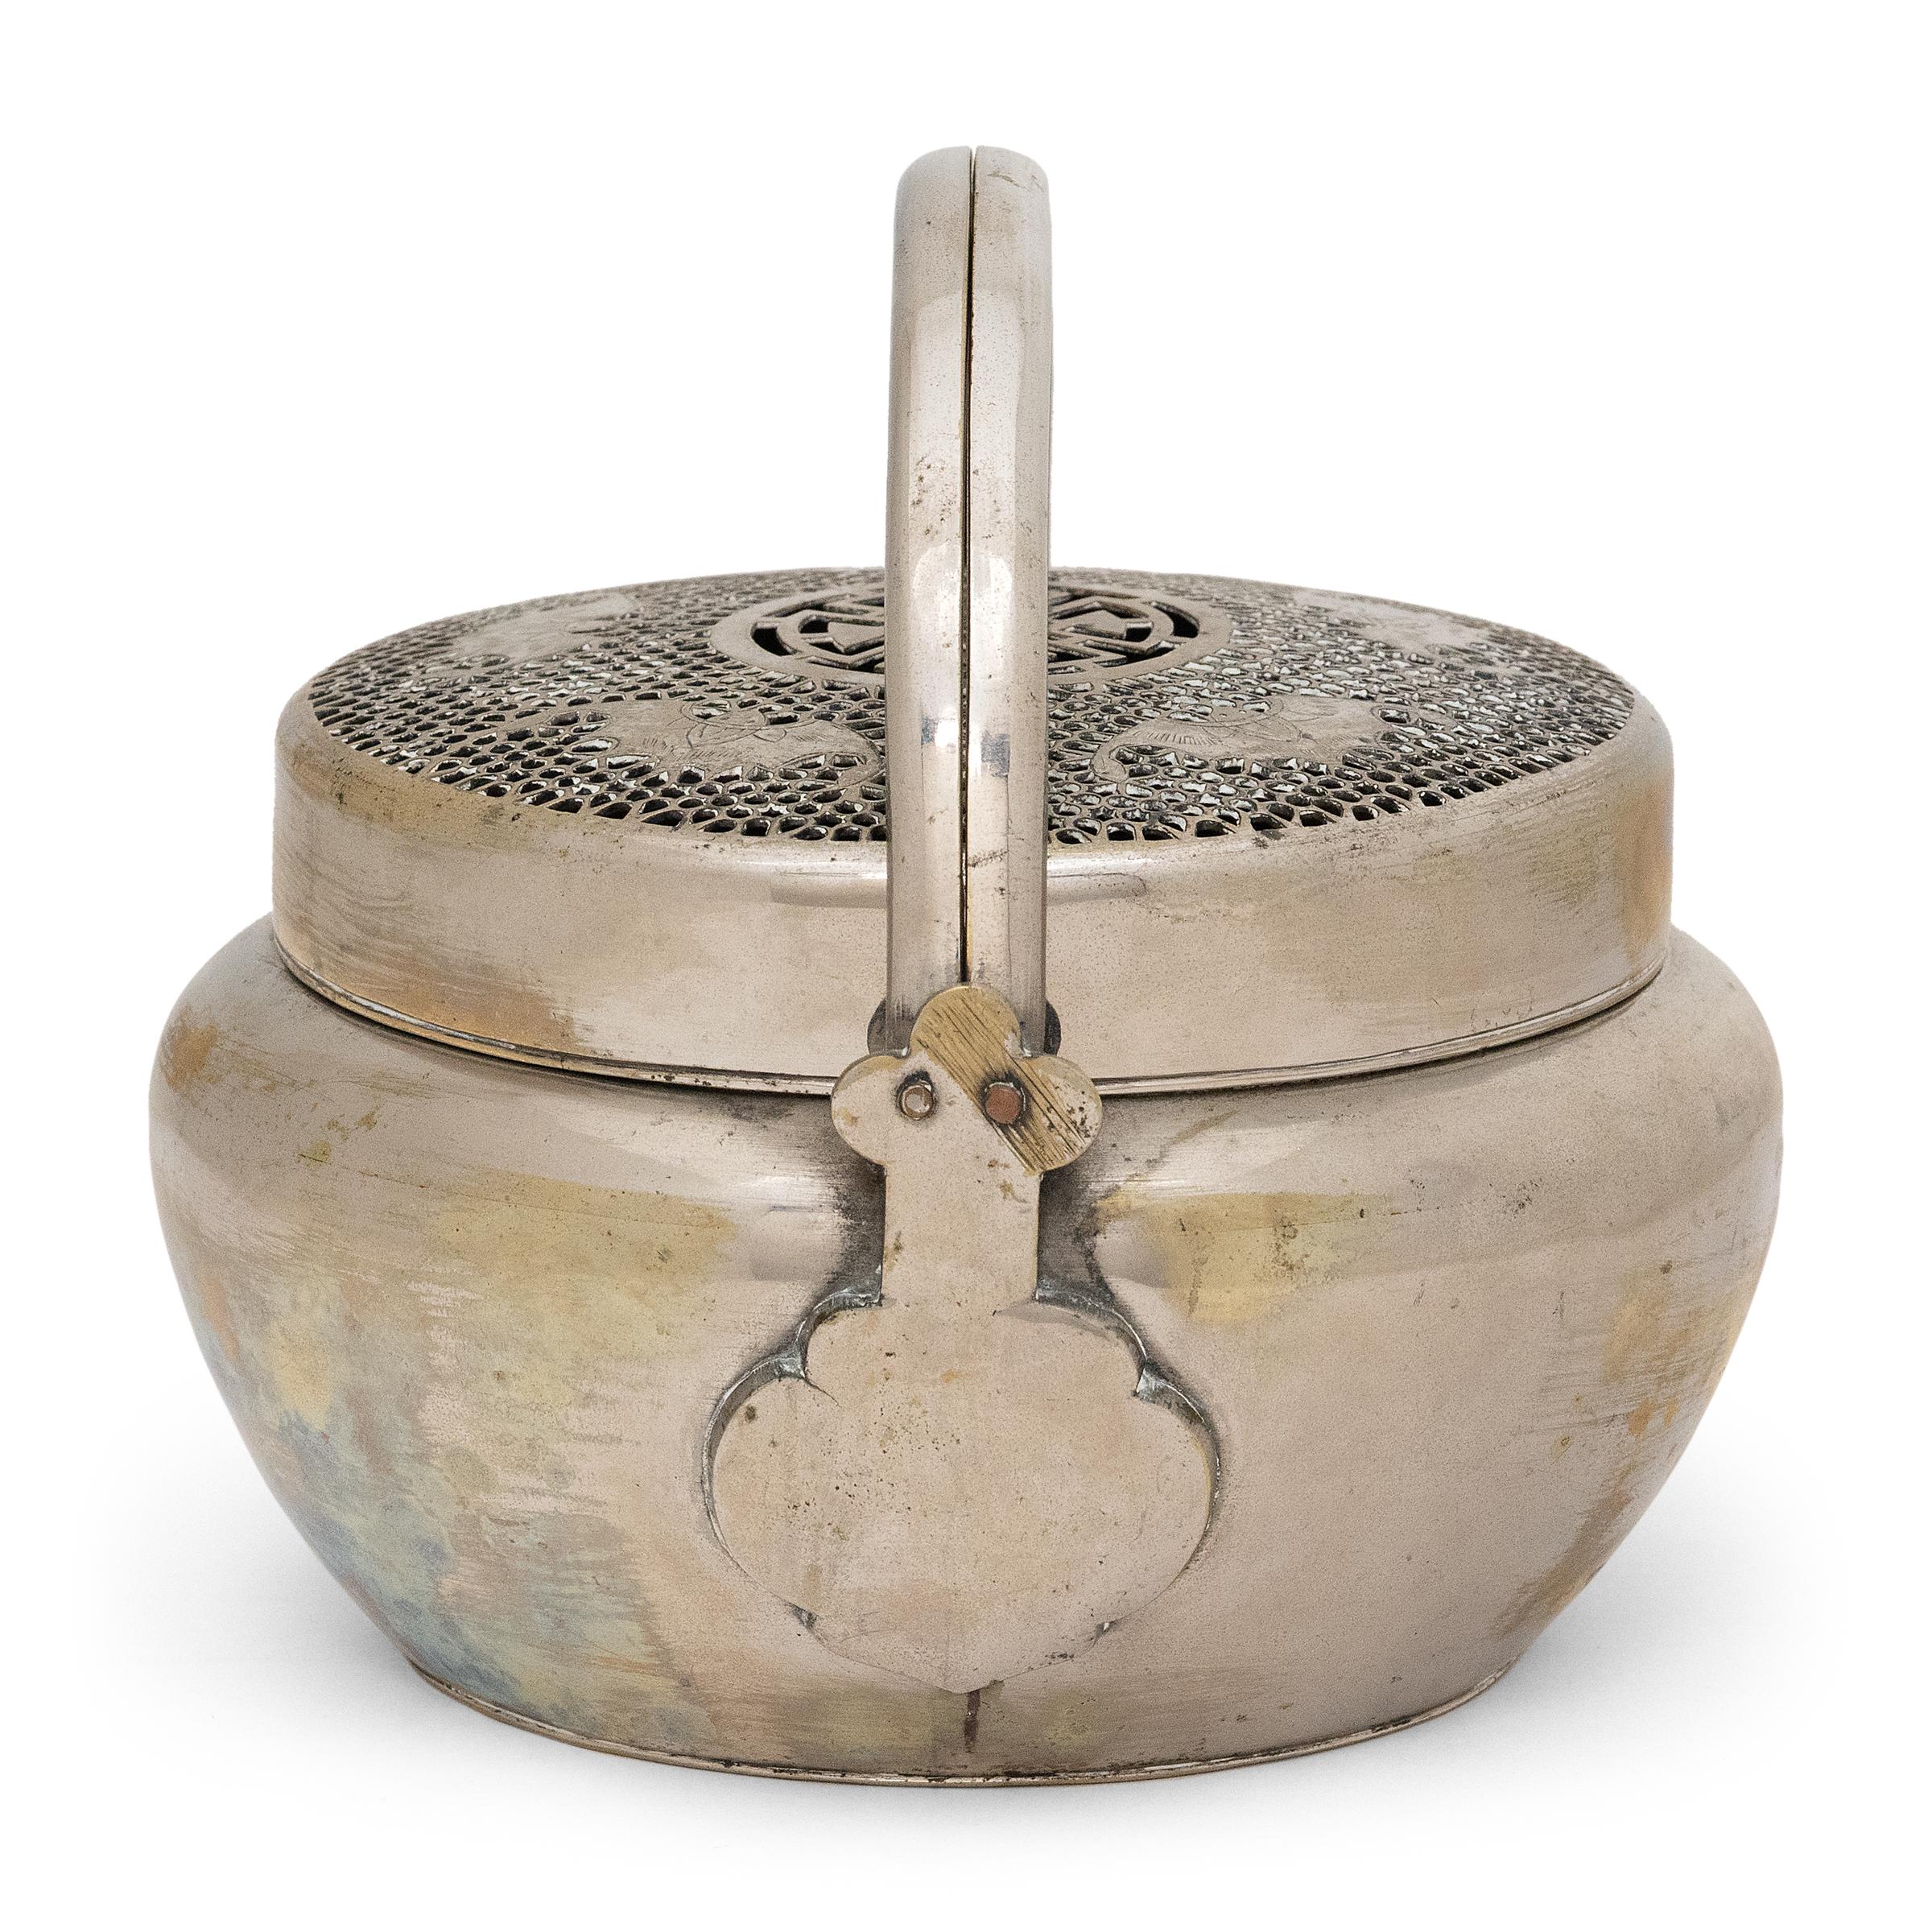 Filled with burning coals, this finely crafted 19th-century brazier once warmed the hands of a wealthy lady on a cold winter's night in northern China. The portable brazier is hand-wrought of white brass with a rounded body, two arched handles and